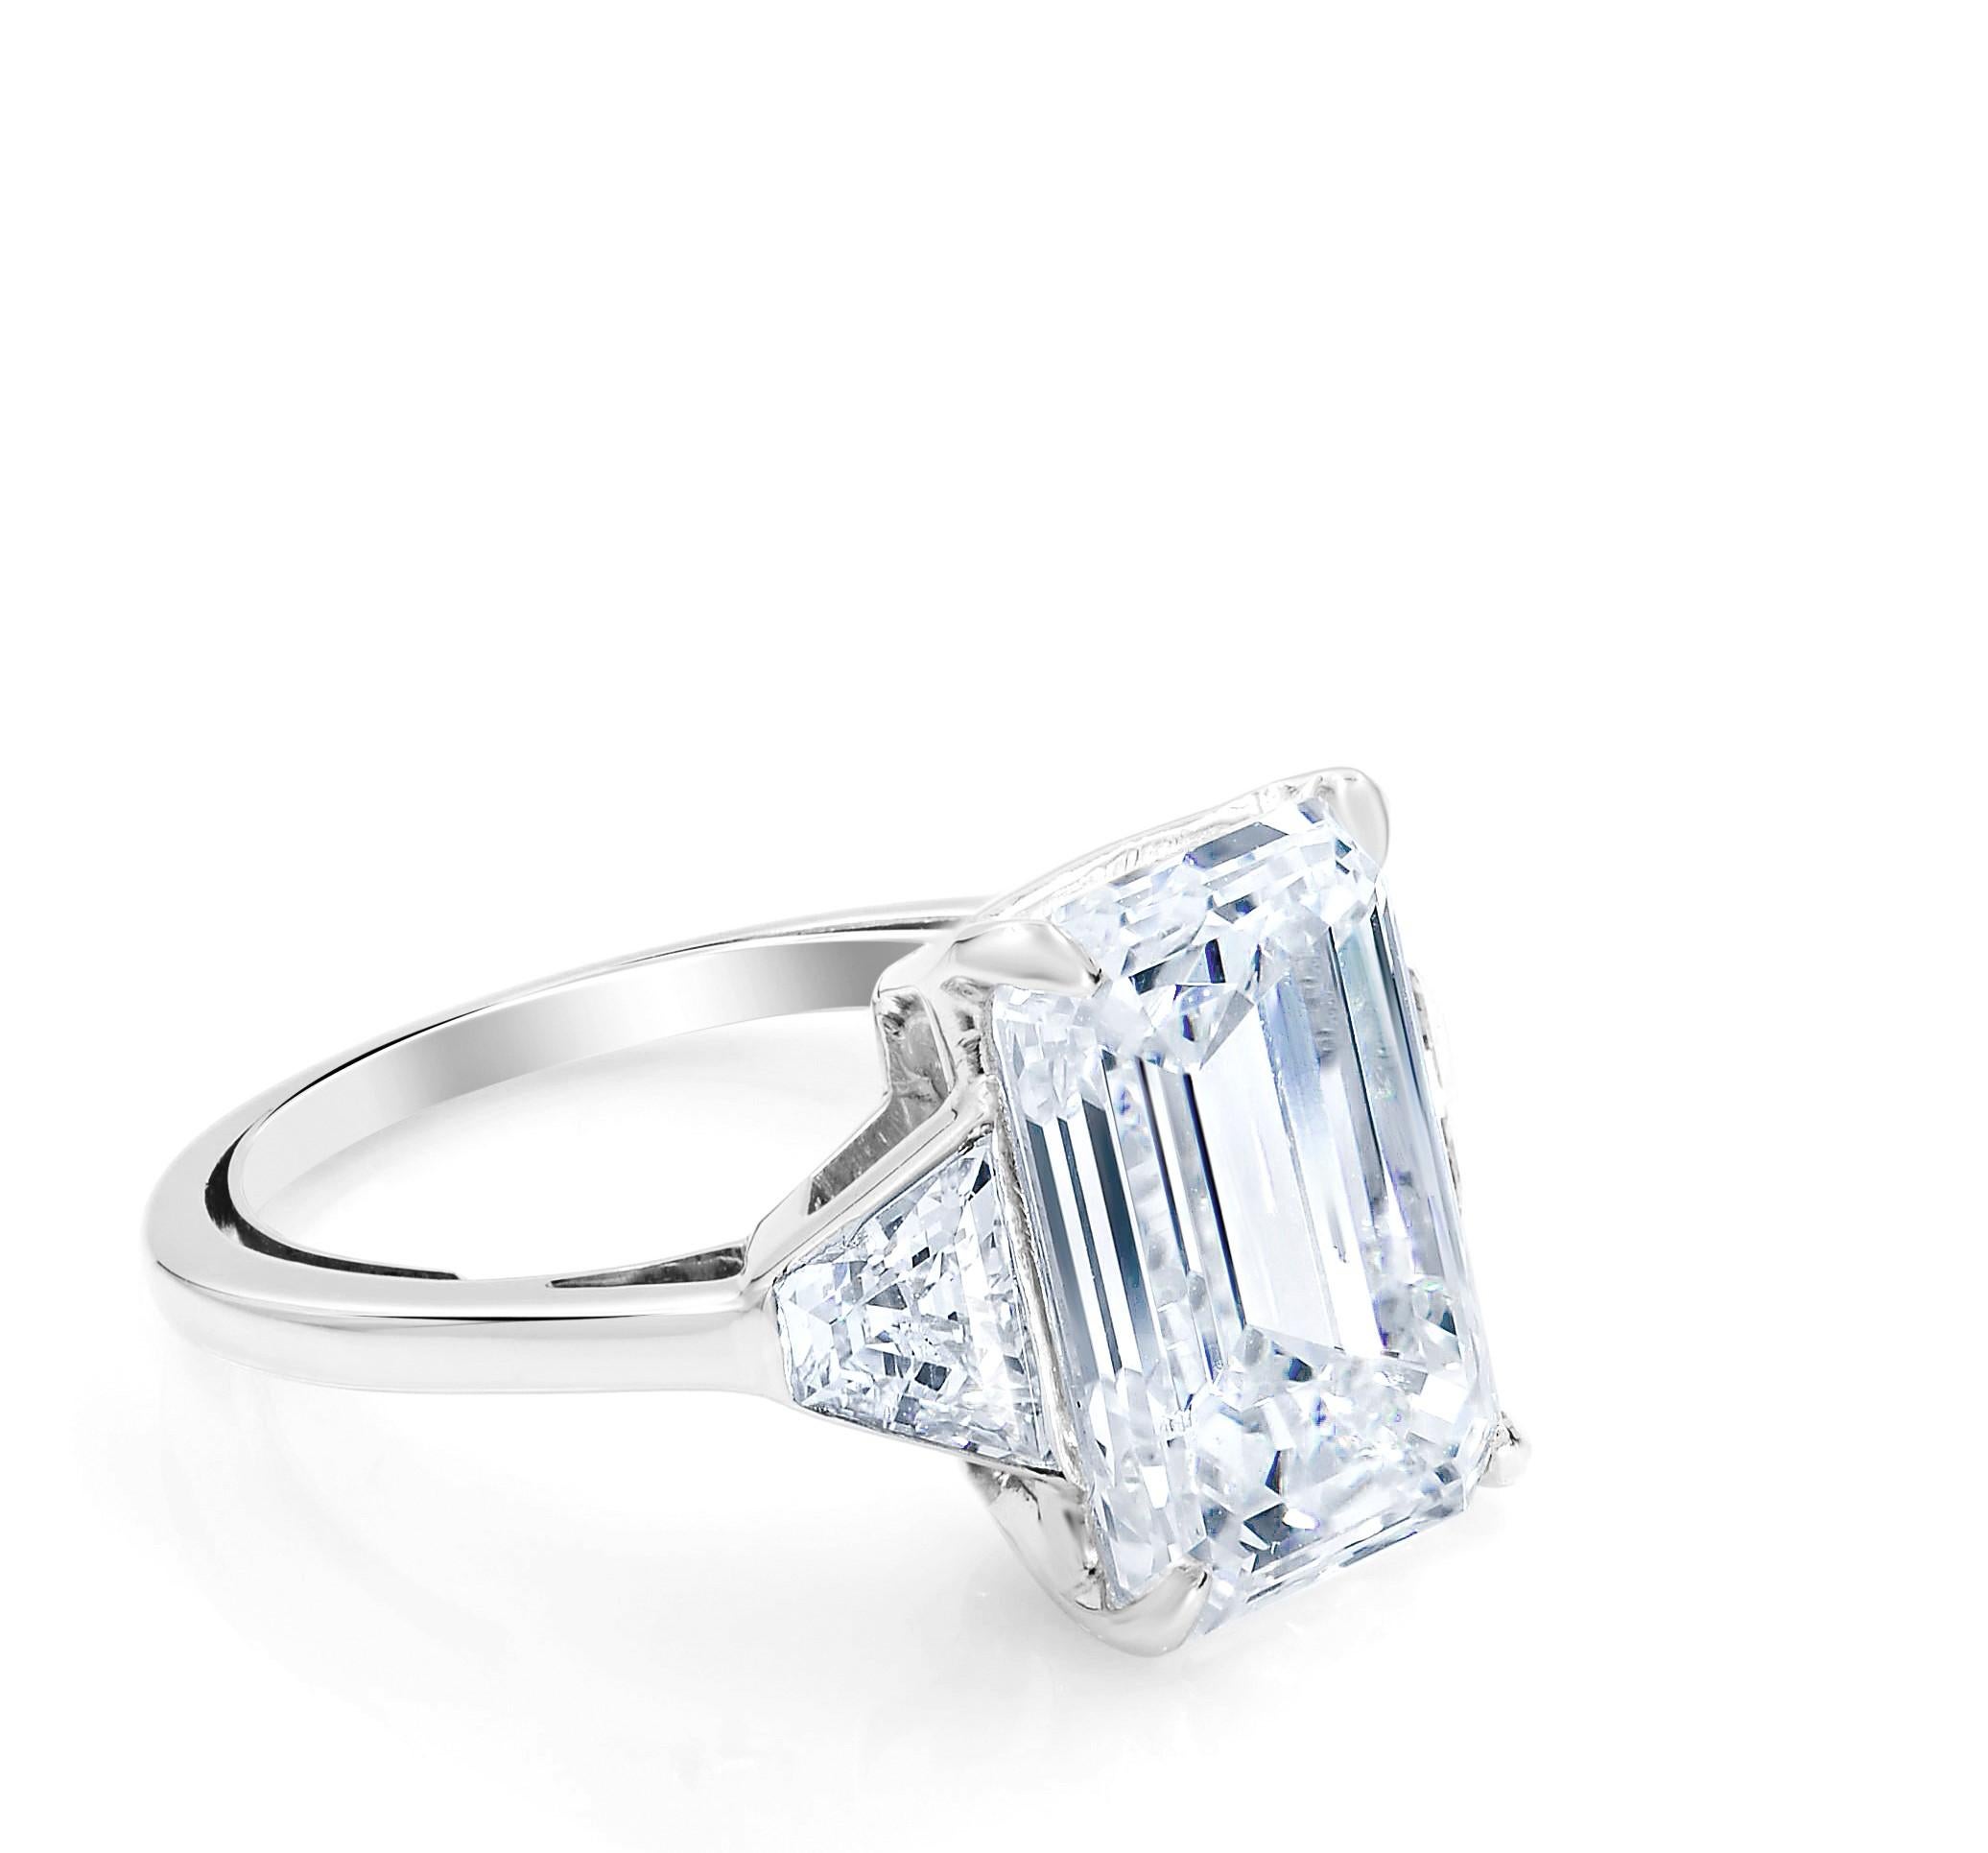 A bright icy-white, sleekly modeled emerald-cut diamond, weighing 5.05 carats, scintillates between a matched pair of trapezoidal cut diamonds creating a fabulous seamless flash of light atop this chic, sophisticated, and stunning classic three